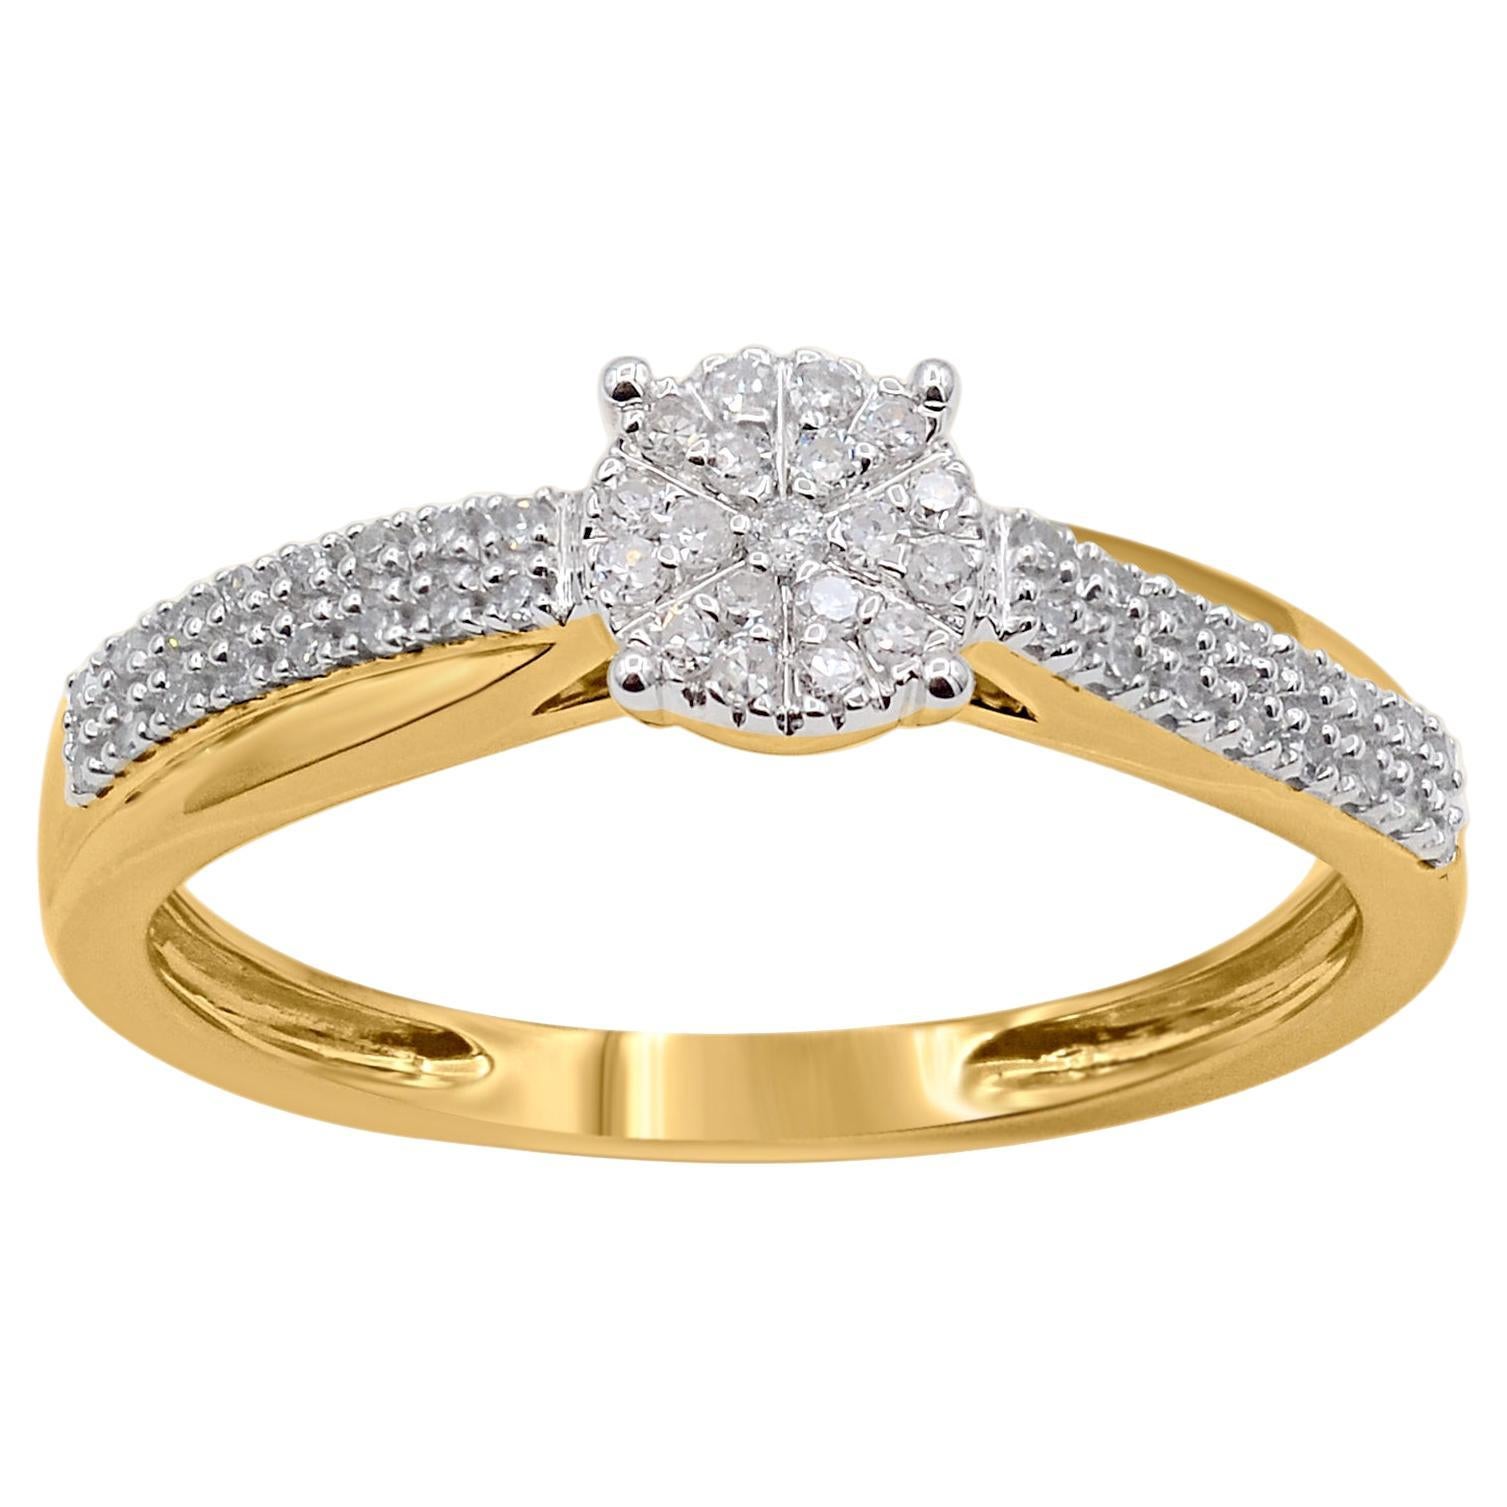 TJD 0.15 Carat Natural Round Diamond Engagement Ring in 14KT Yellow Gold For Sale